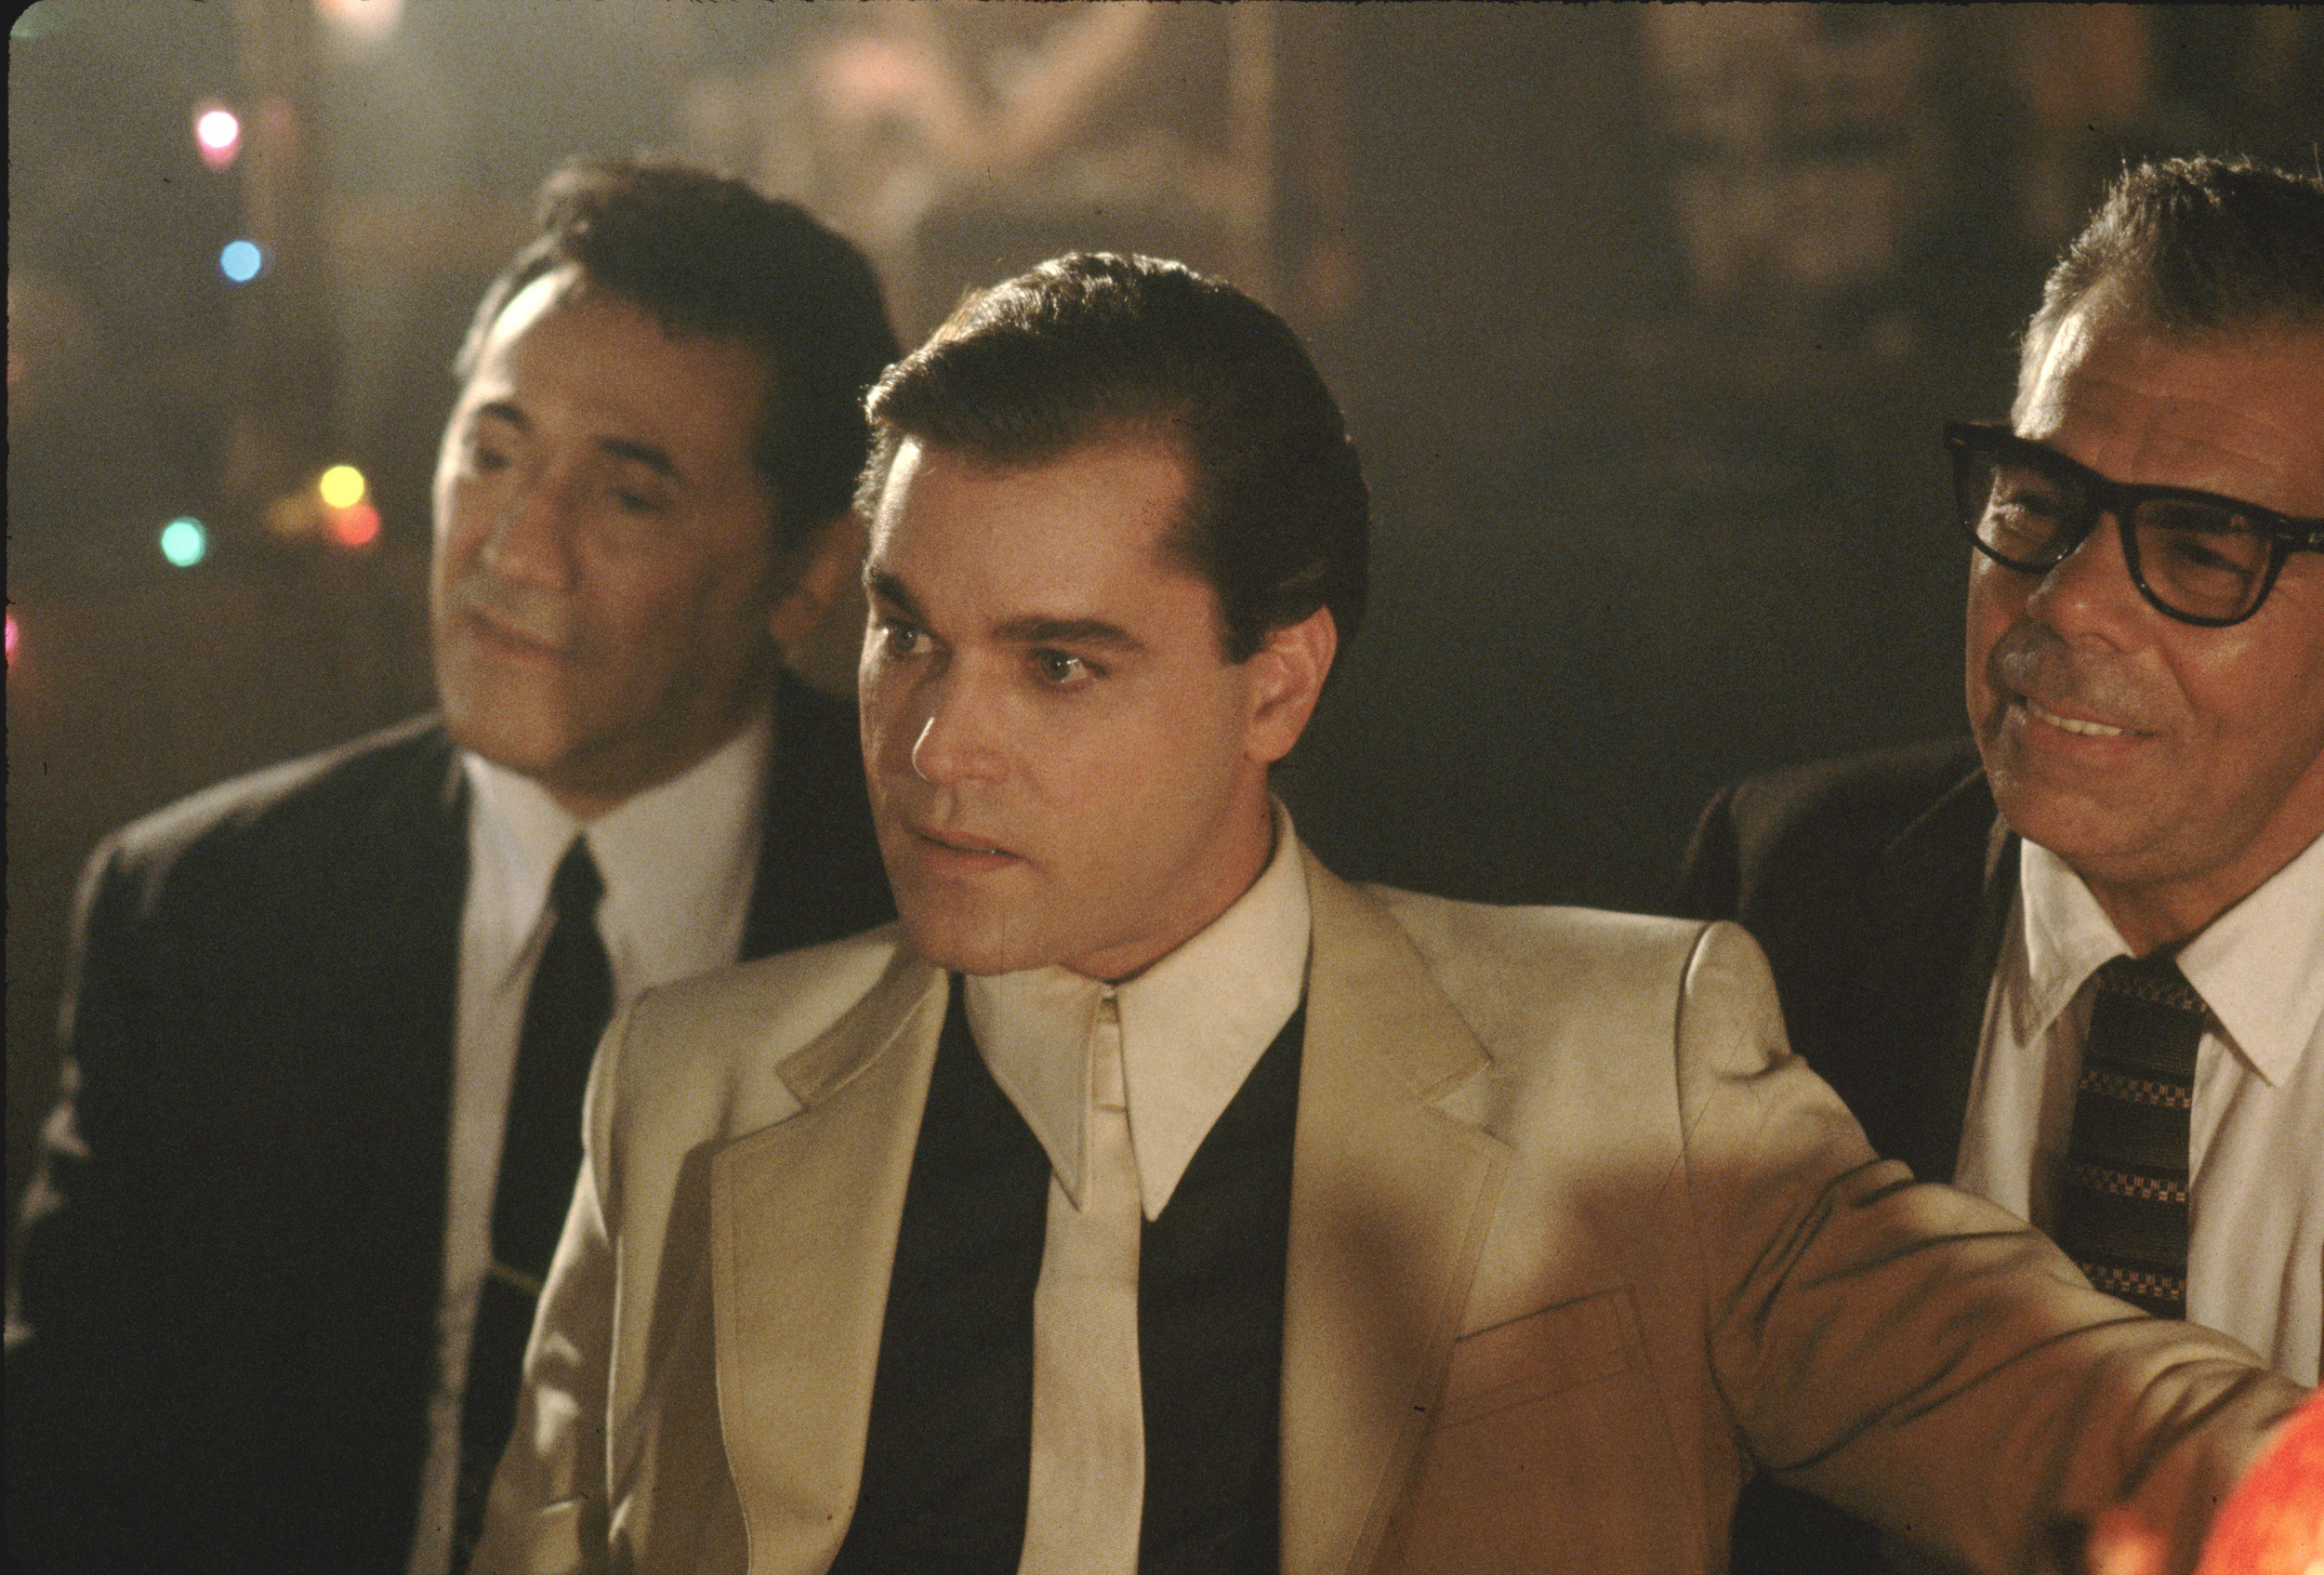 20 facts you might not know about 'Goodfellas'